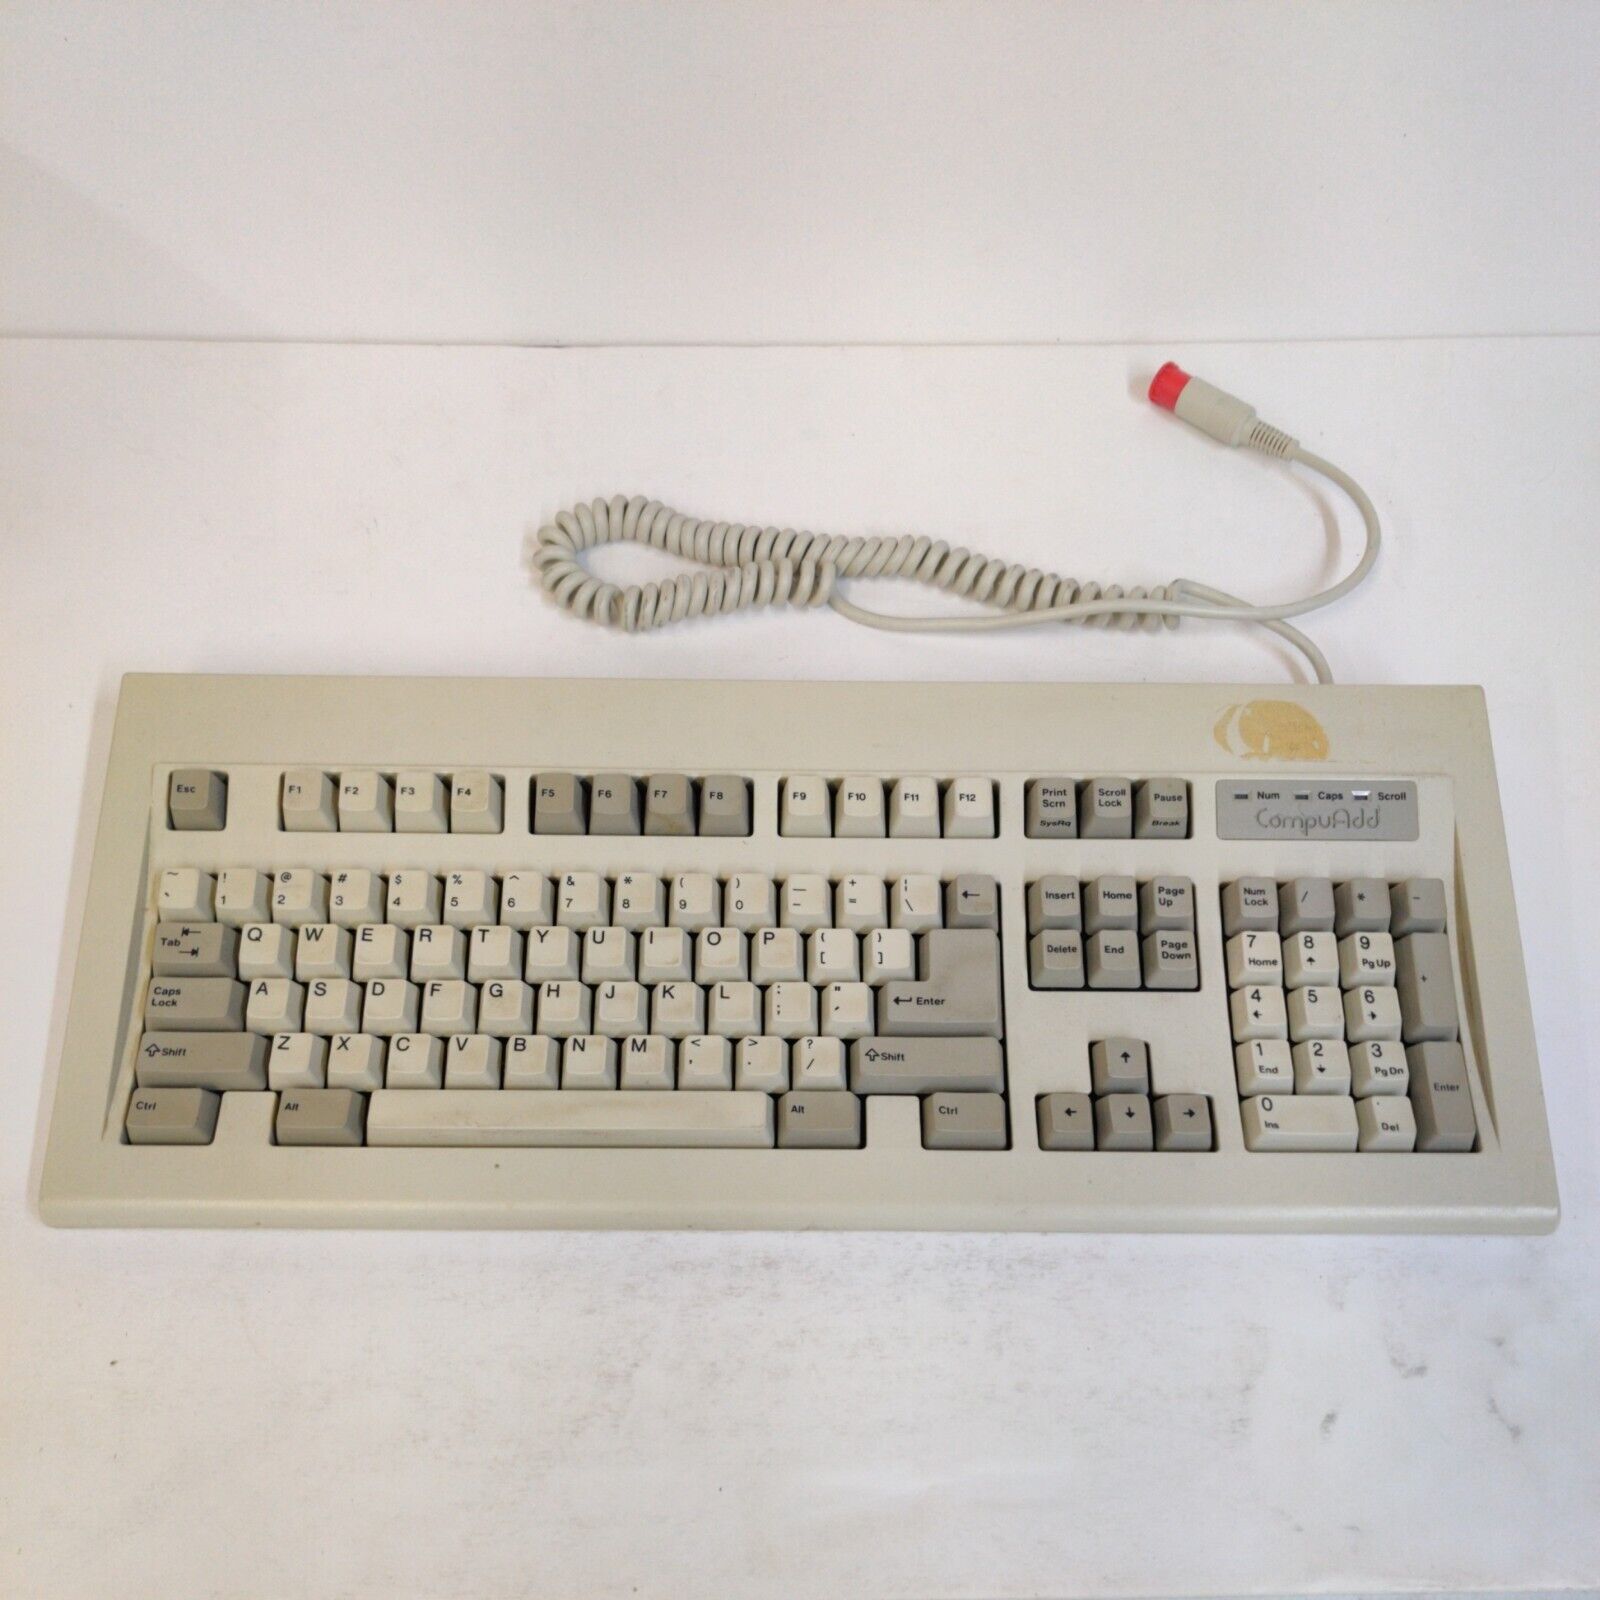 Compuadd keyboard AQ6-COMPA RT-101+ 55153 117700-001 REV C AT DIN Connector